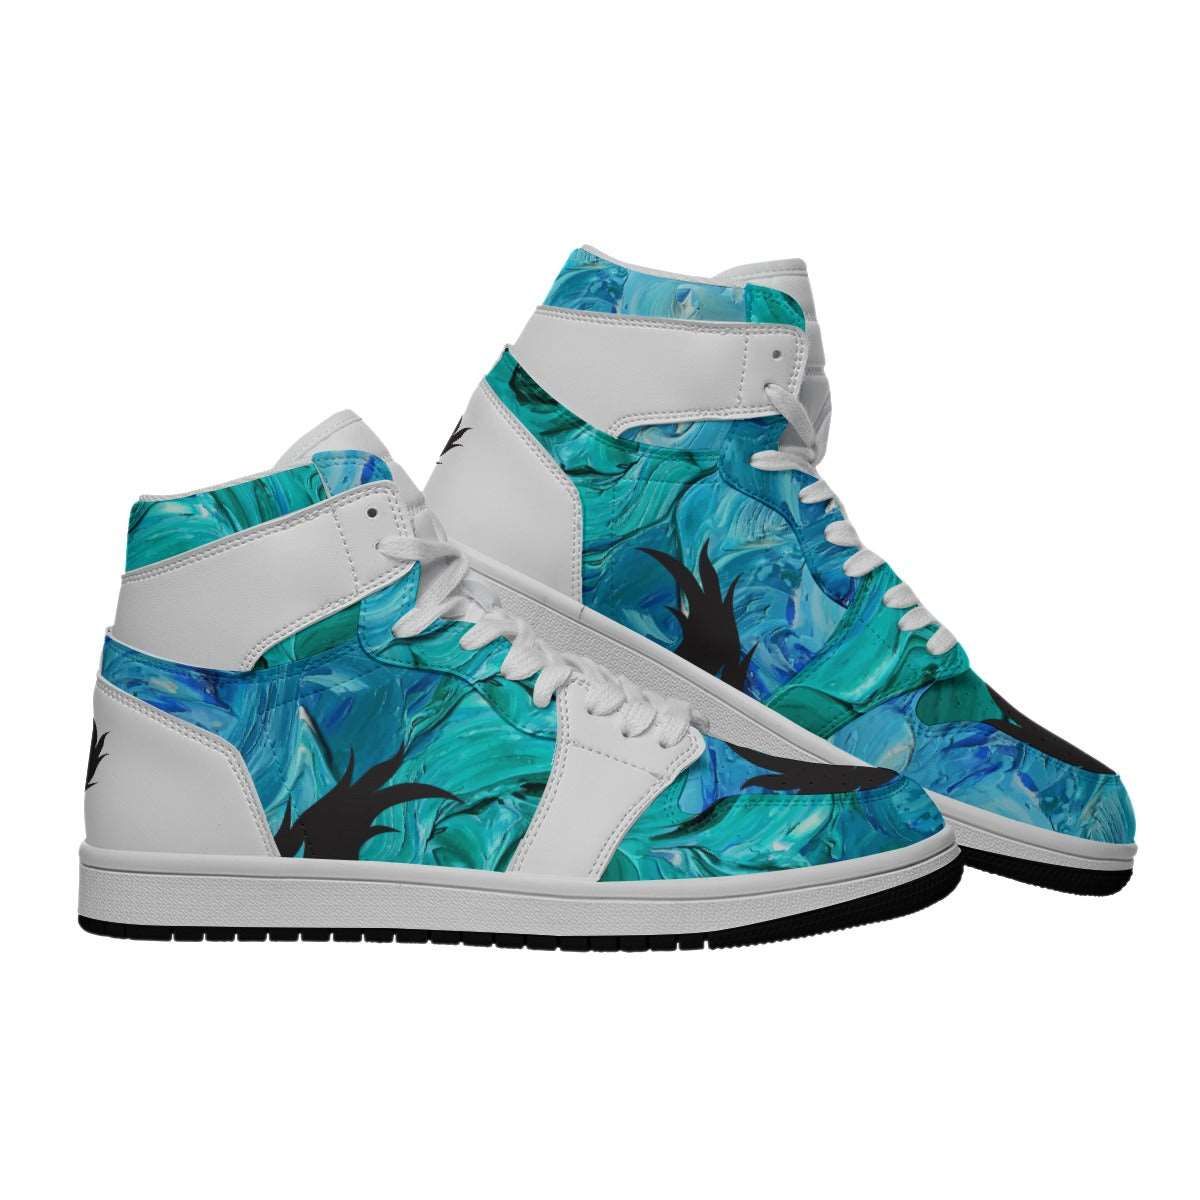 Dragon Guard Drip Blue Fire OG Men's Synthetic Leather High top Shoes